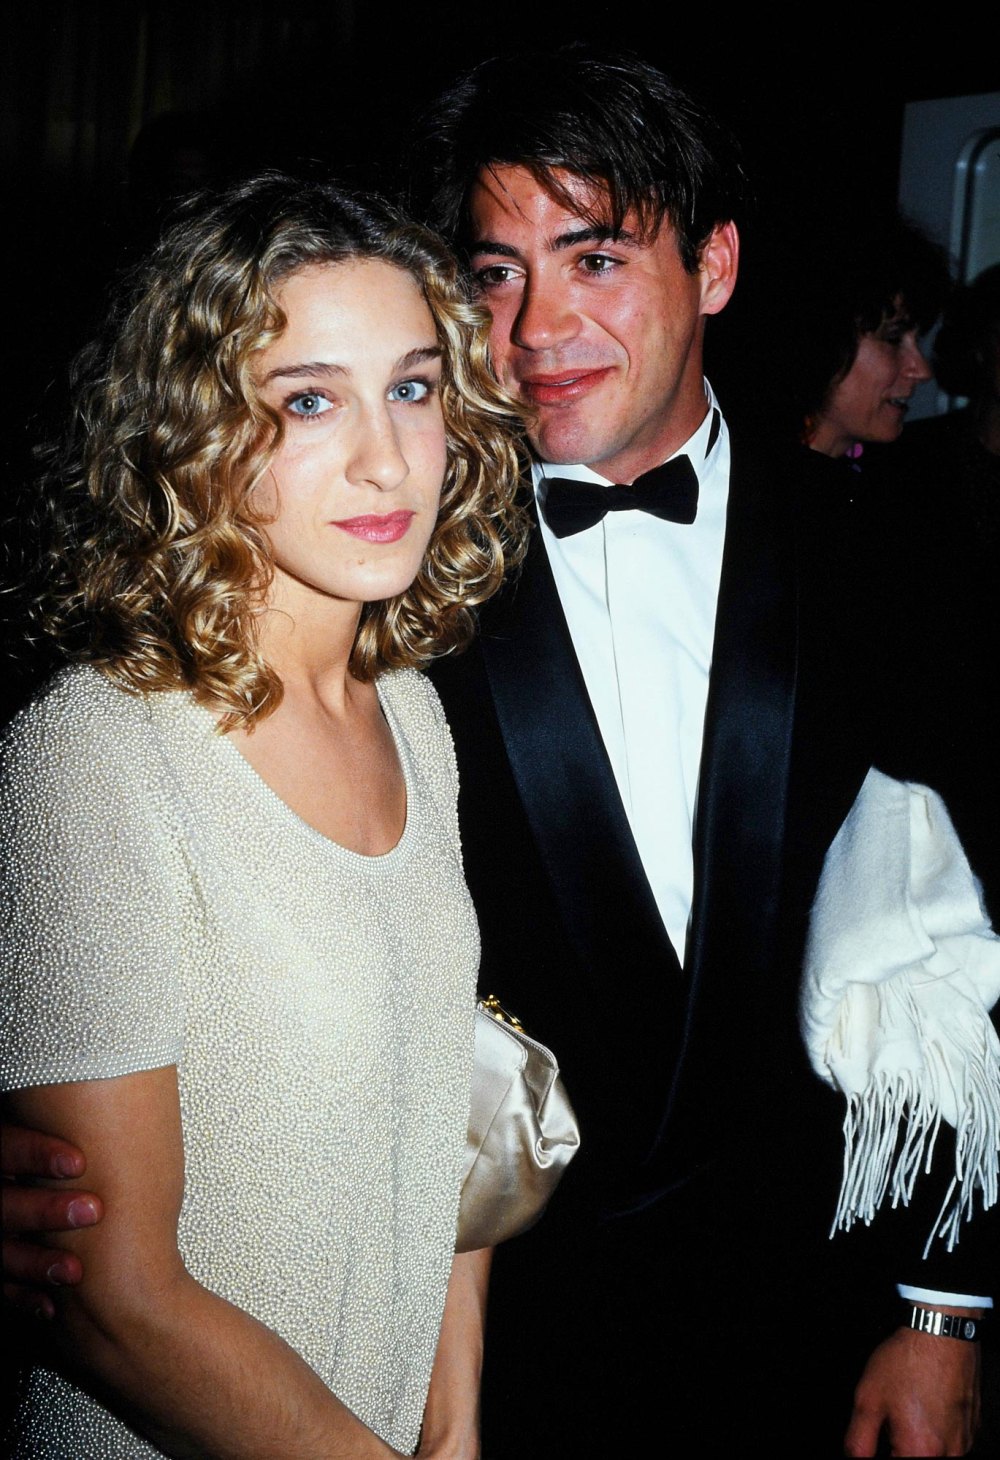 Sarah-Jessica-Parker-Recalls-Feeling--Angry-and-Embarrassed--During-Robert-Downey-Jr.-Romance-605